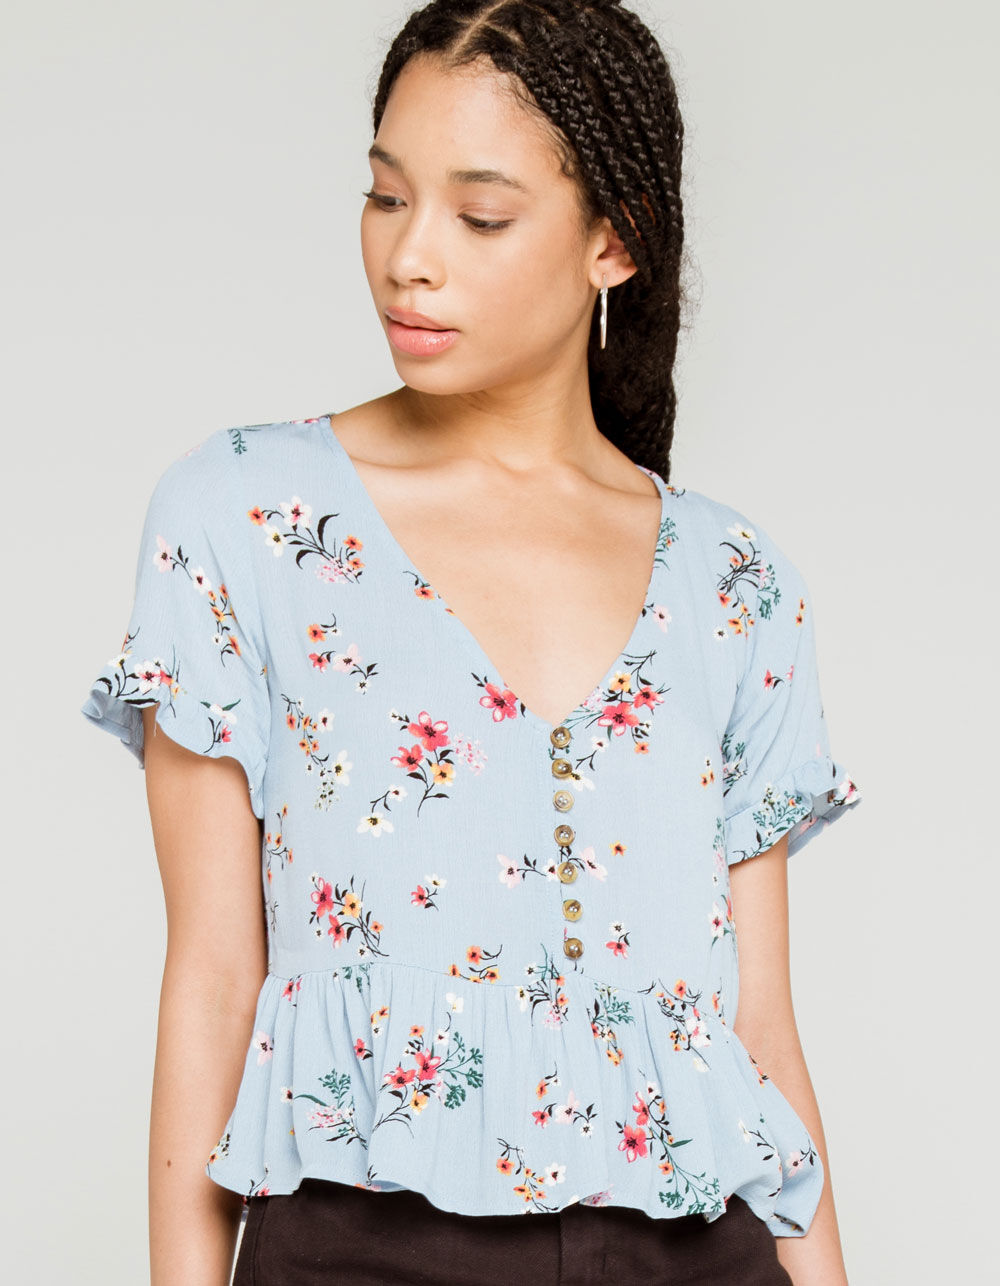 SKY AND SPARROW Floral Button Up Womens Babydoll Top - LIGHT BLUE | Tillys